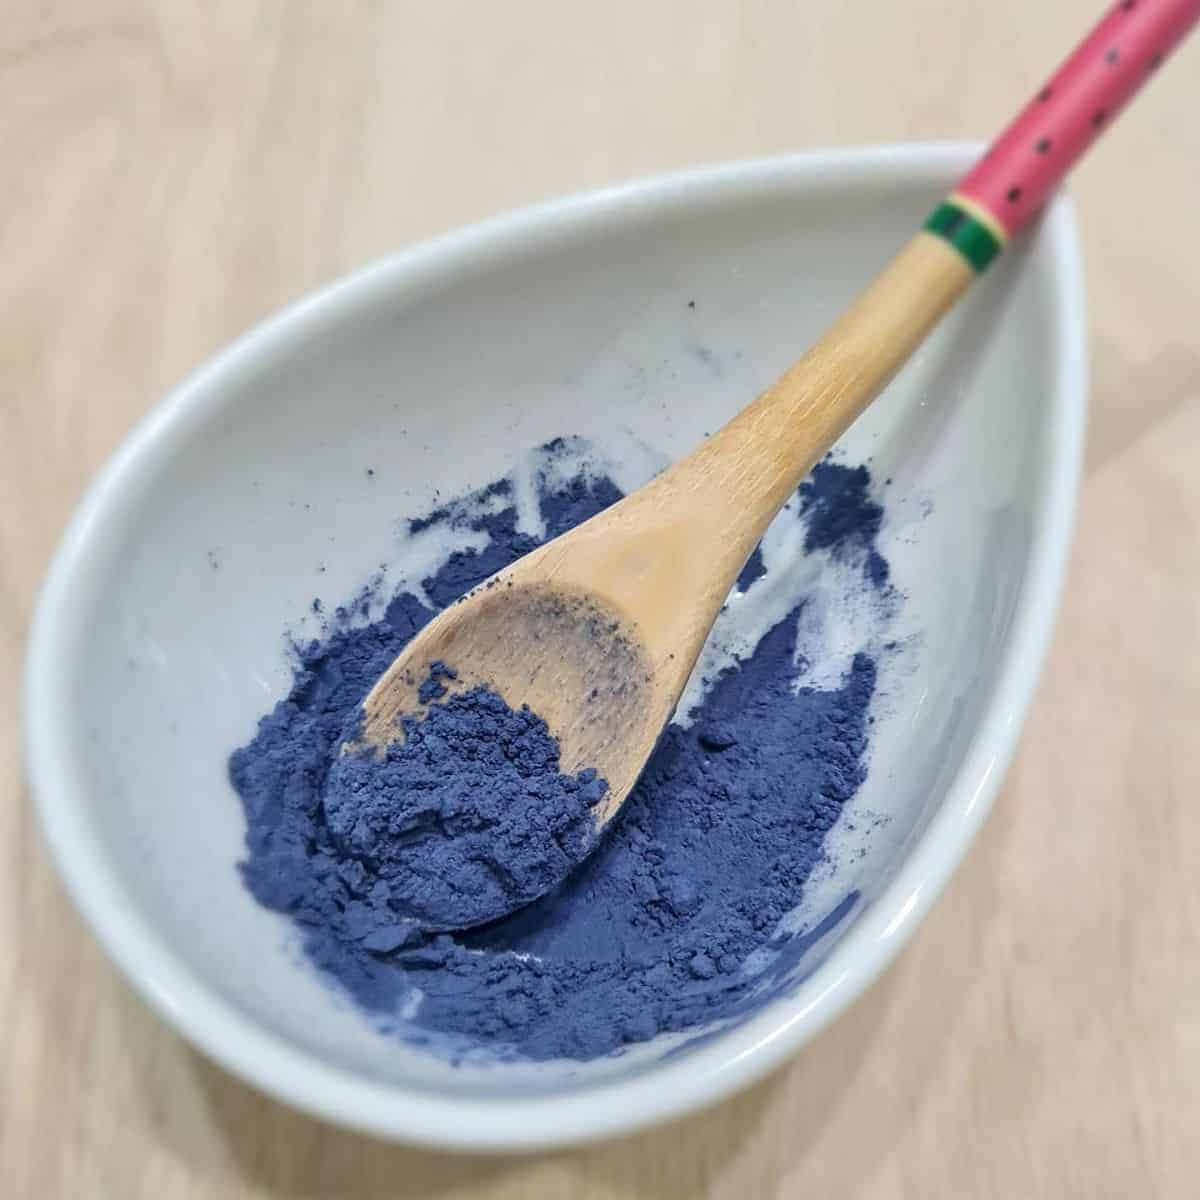 Blue Pea flower powder in a white bowl with a wooden spoon